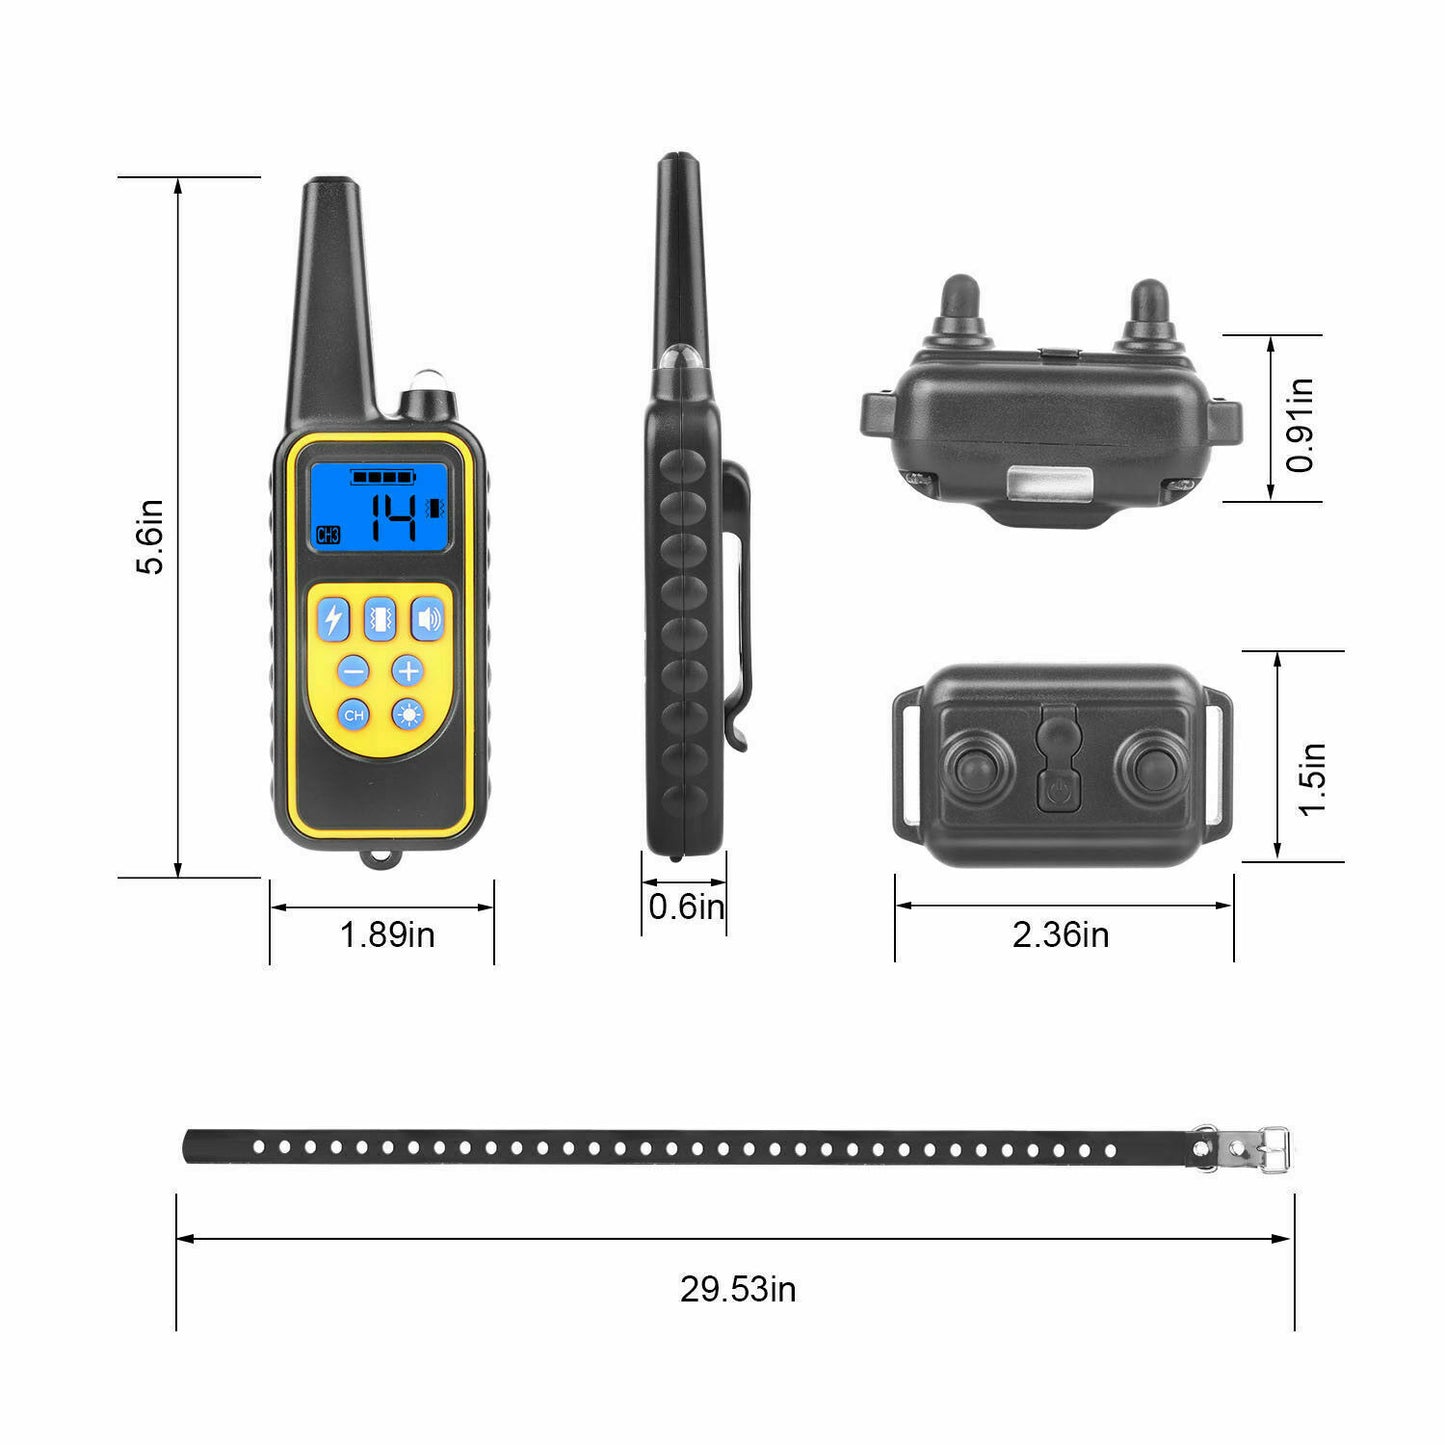 2700 FT Remote Dog Shock Training Collar Rechargeable Waterproof LCD Pet Trainer